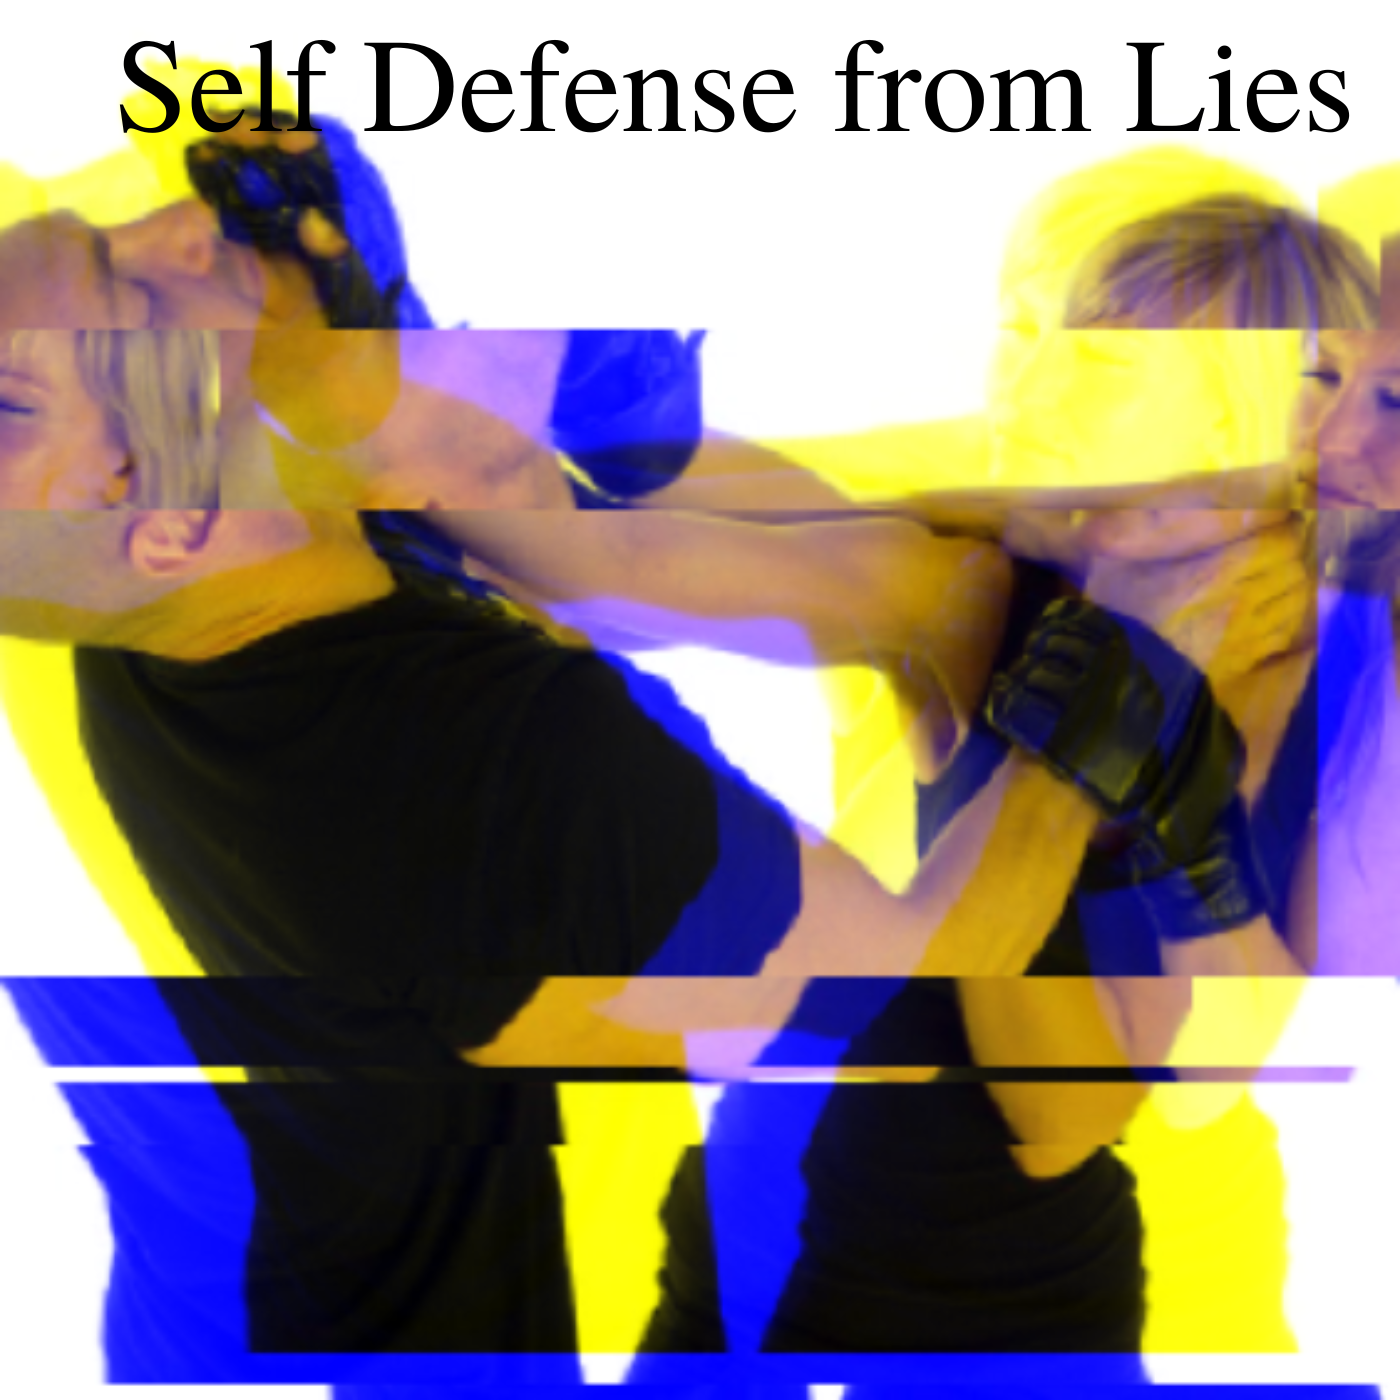 Self Defense from Lies